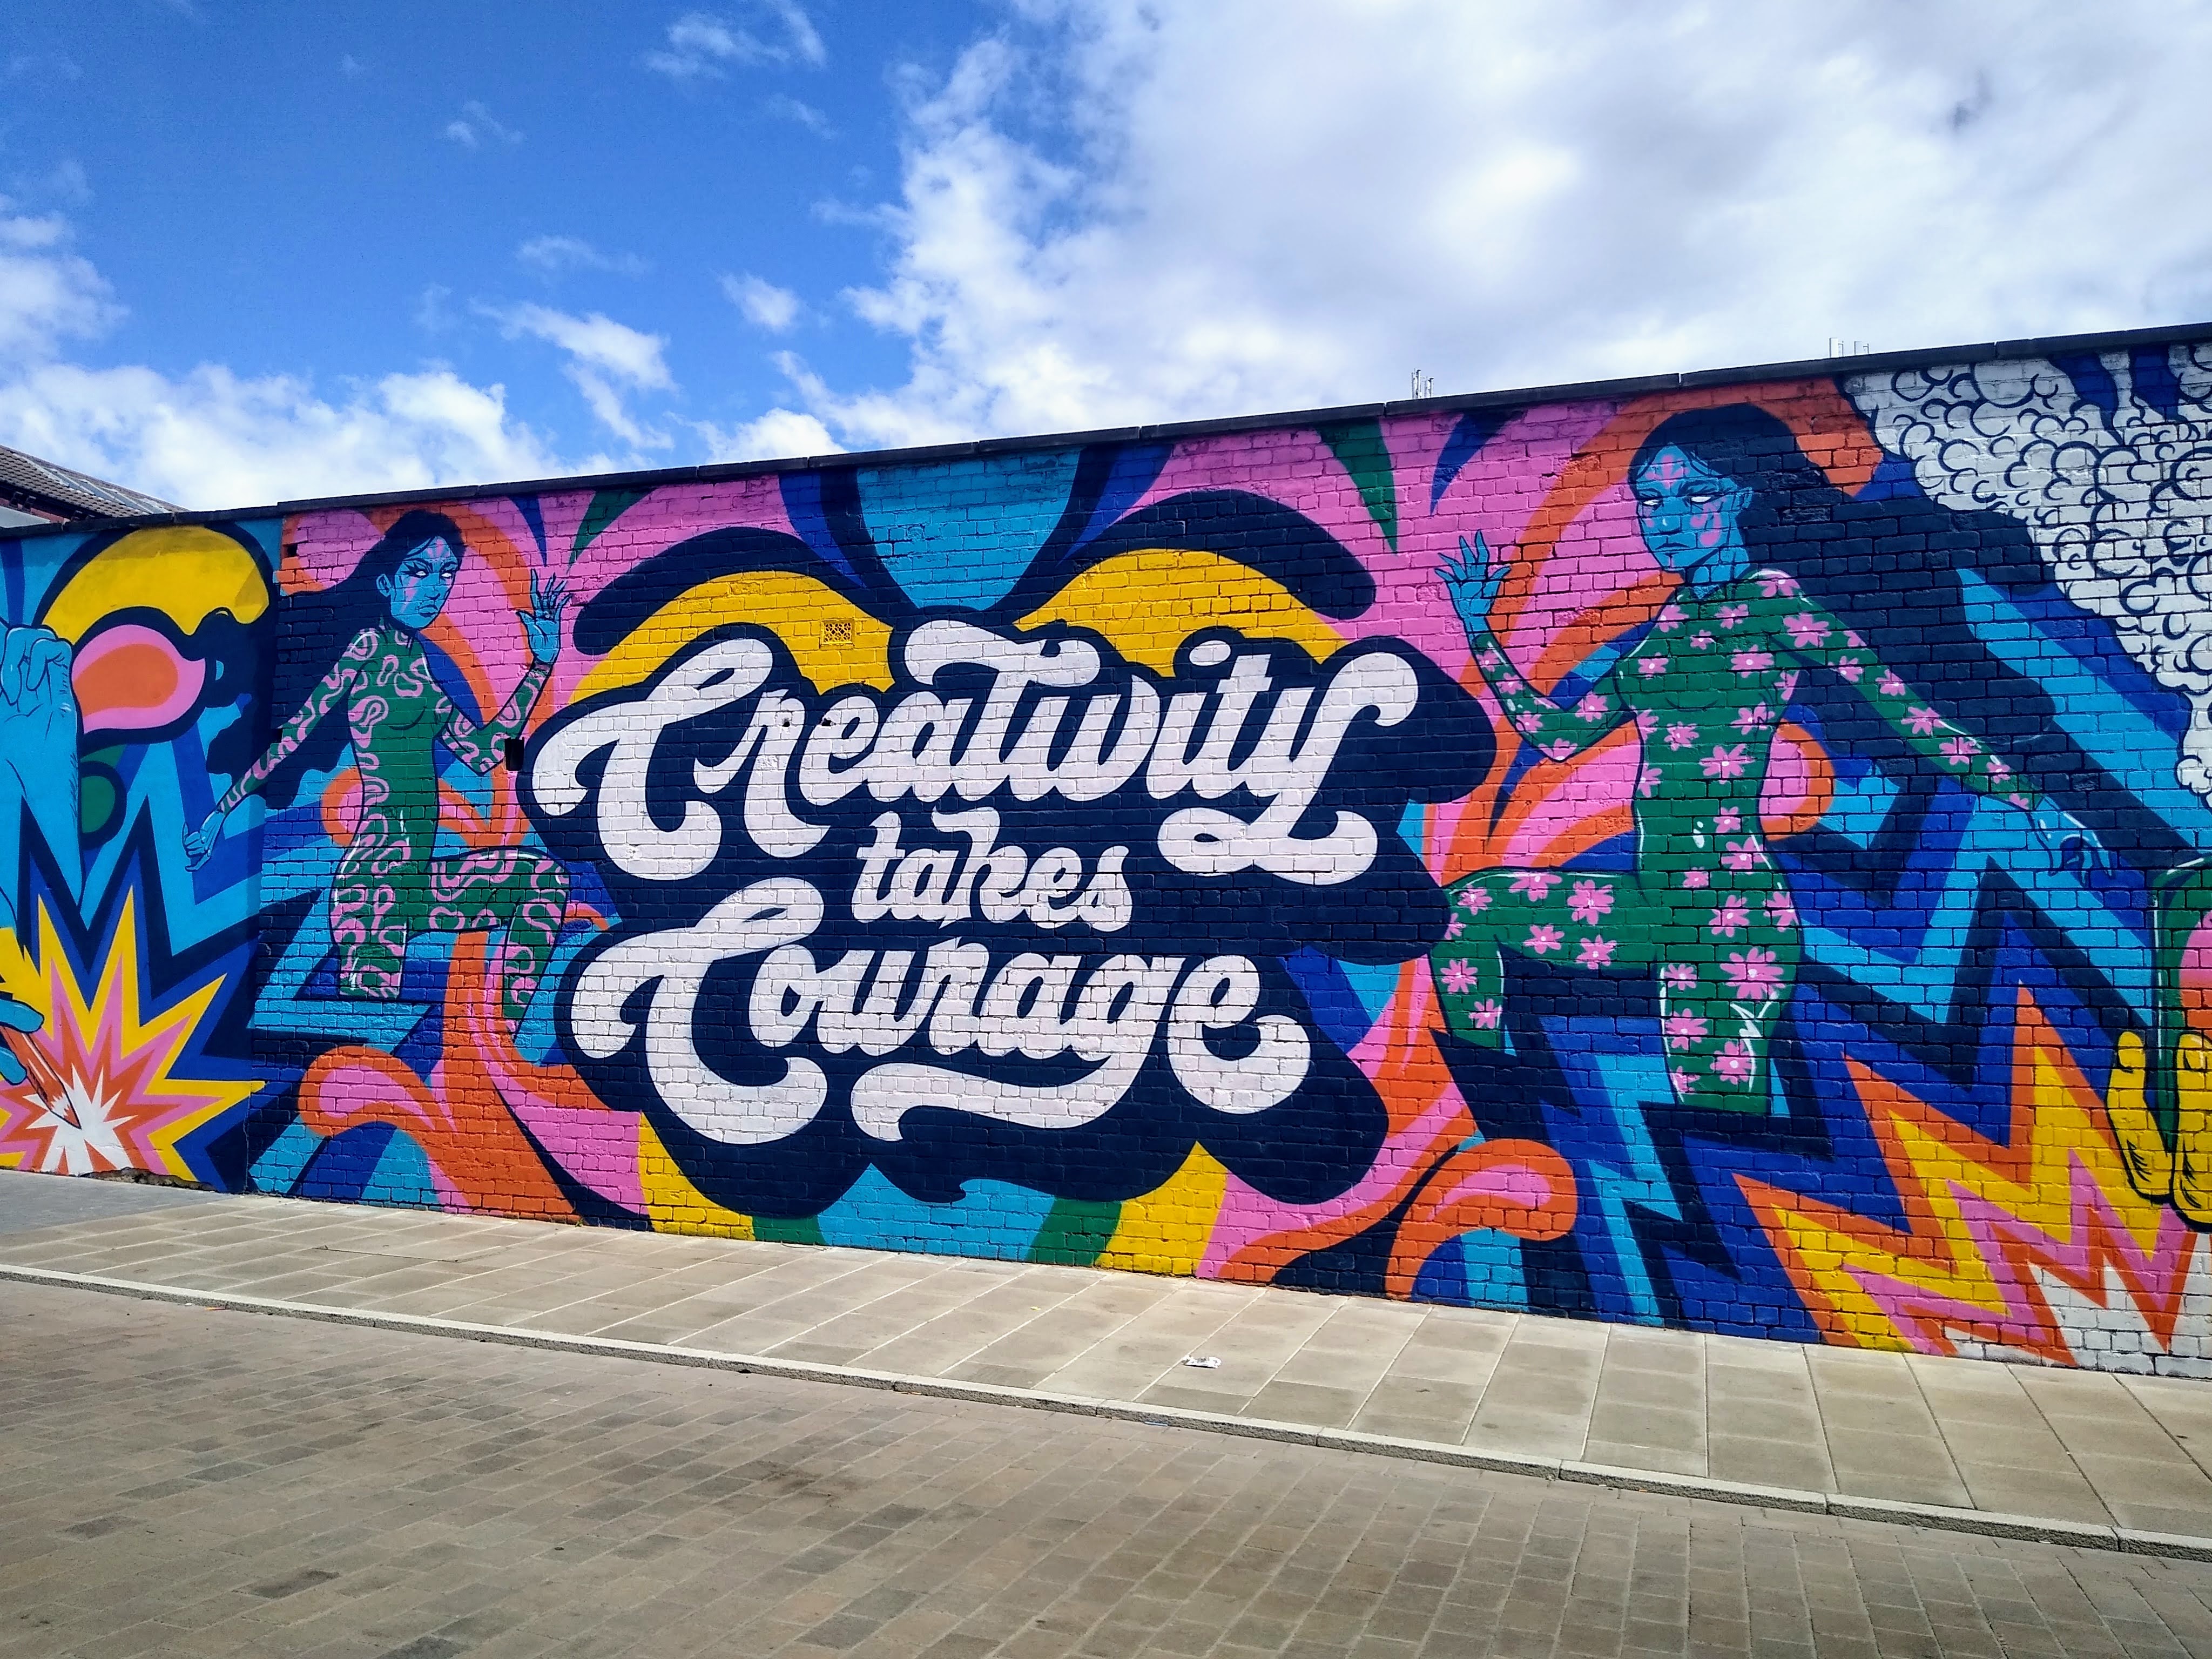 A photograph of a colourful mural on an urban wall. The mural depicts two female figures atop a background of waves and sharp-edged explosion-like imagery. Text in the middle, painted in a 60s style, reads 'Creativity Takes Courage'.